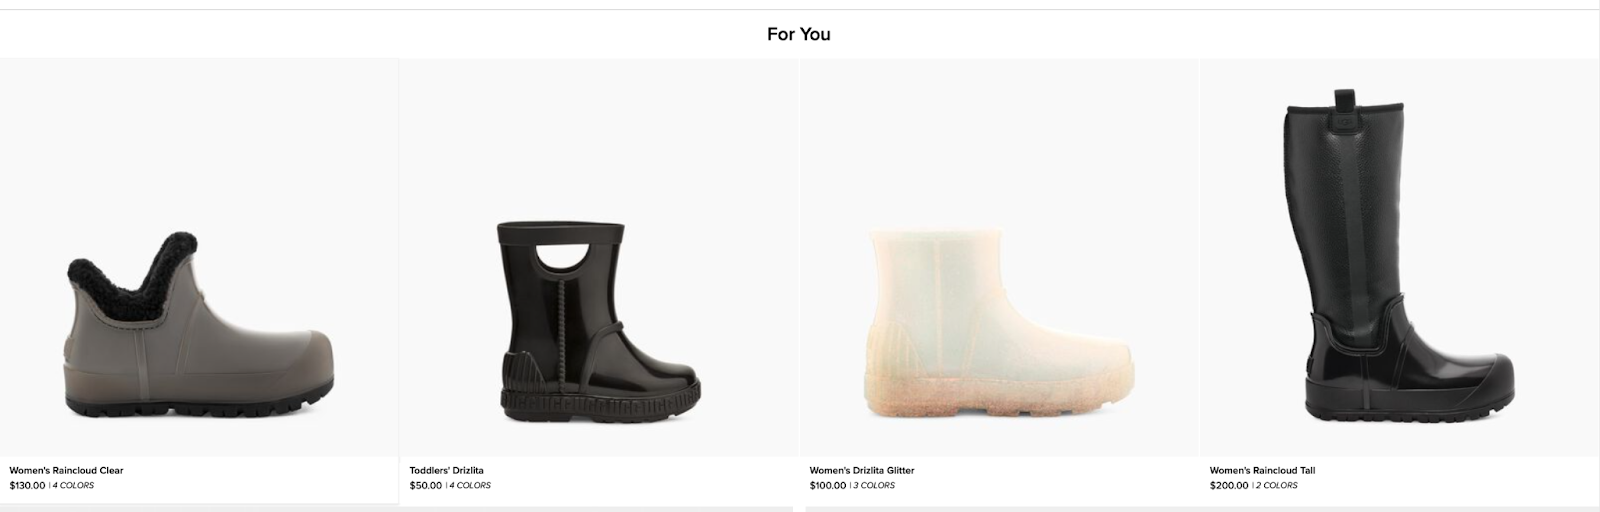 Upsell widget example from Ugg Boots